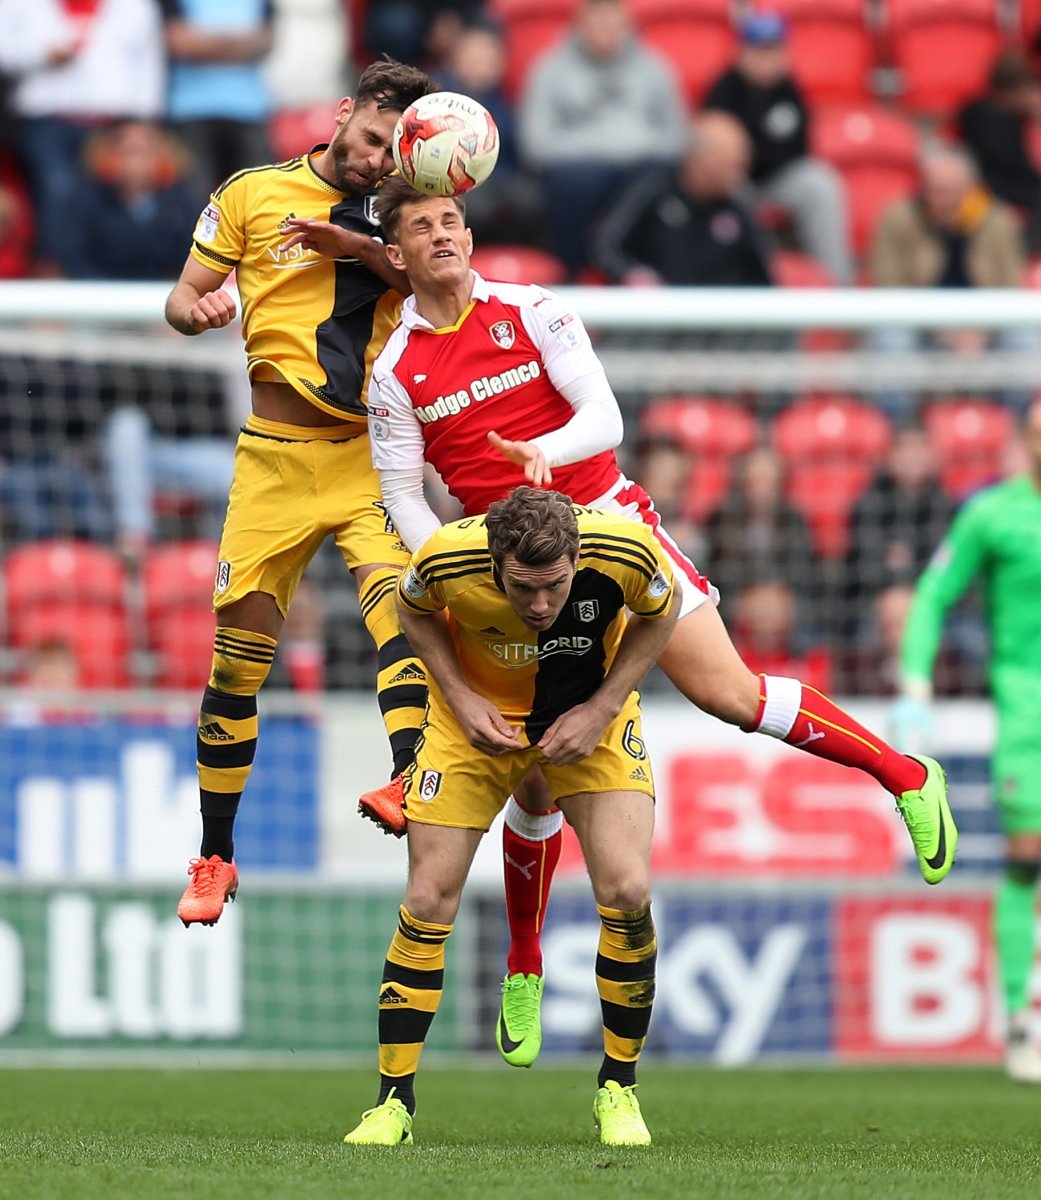 Sunderland: Rotherham manager Paul Warne reveals update on Black Cats transfer target Jerry Yates - League One News